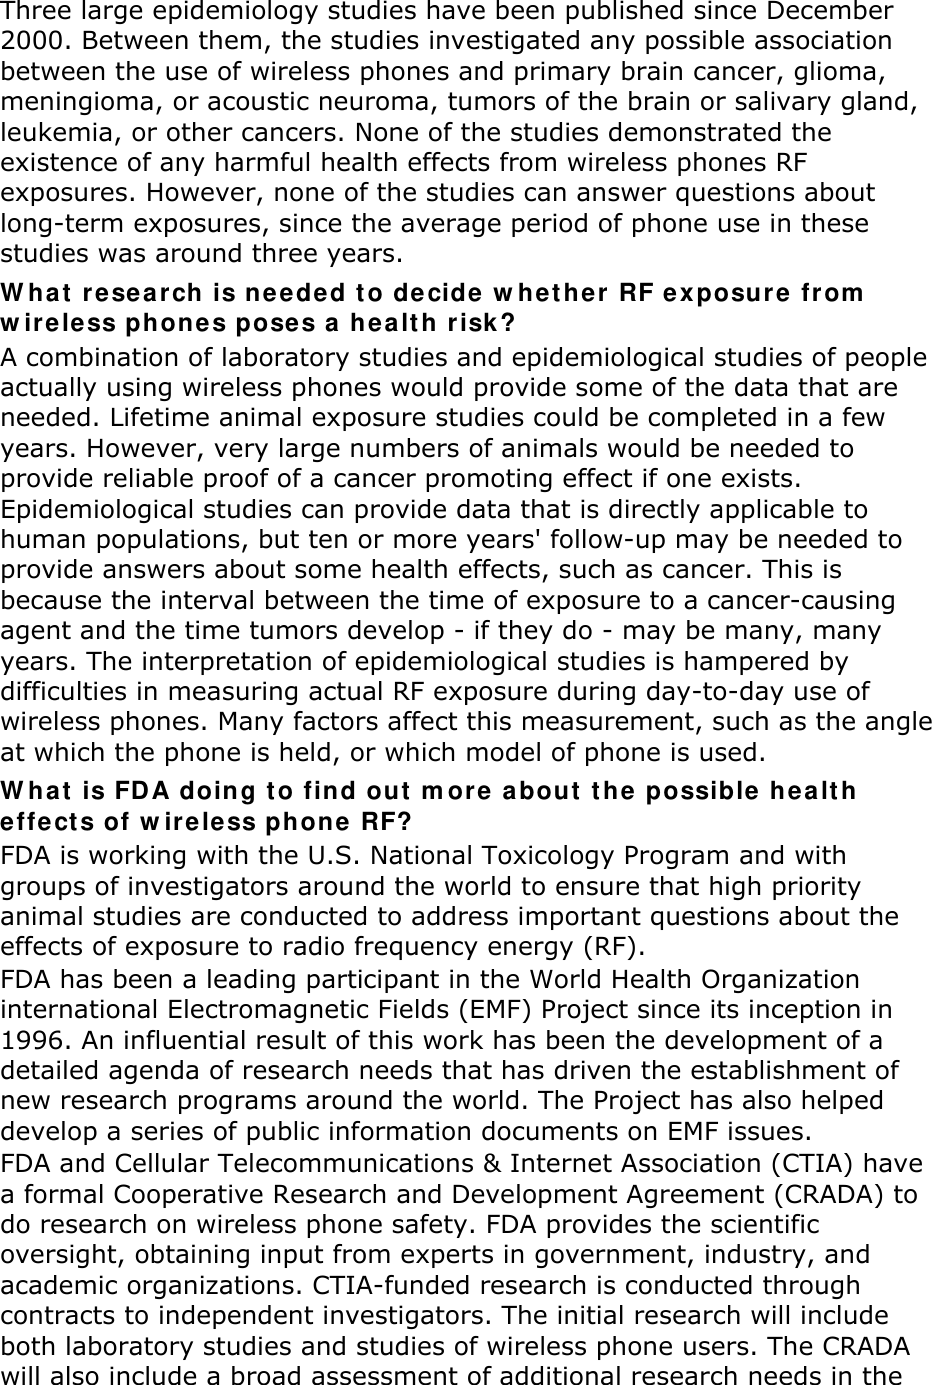 Three large epidemiology studies have been published since December 2000. Between them, the studies investigated any possible association between the use of wireless phones and primary brain cancer, glioma, meningioma, or acoustic neuroma, tumors of the brain or salivary gland, leukemia, or other cancers. None of the studies demonstrated the existence of any harmful health effects from wireless phones RF exposures. However, none of the studies can answer questions about long-term exposures, since the average period of phone use in these studies was around three years. W ha t  resear ch is neede d t o decide w het he r RF e xposure from  w ireless phones pose s a  he alt h risk? A combination of laboratory studies and epidemiological studies of people actually using wireless phones would provide some of the data that are needed. Lifetime animal exposure studies could be completed in a few years. However, very large numbers of animals would be needed to provide reliable proof of a cancer promoting effect if one exists. Epidemiological studies can provide data that is directly applicable to human populations, but ten or more years&apos; follow-up may be needed to provide answers about some health effects, such as cancer. This is because the interval between the time of exposure to a cancer-causing agent and the time tumors develop - if they do - may be many, many years. The interpretation of epidemiological studies is hampered by difficulties in measuring actual RF exposure during day-to-day use of wireless phones. Many factors affect this measurement, such as the angle at which the phone is held, or which model of phone is used. W ha t  is FDA doing t o find out  m ore about  t he possible healt h effe cts of w irele ss phone RF? FDA is working with the U.S. National Toxicology Program and with groups of investigators around the world to ensure that high priority animal studies are conducted to address important questions about the effects of exposure to radio frequency energy (RF). FDA has been a leading participant in the World Health Organization international Electromagnetic Fields (EMF) Project since its inception in 1996. An influential result of this work has been the development of a detailed agenda of research needs that has driven the establishment of new research programs around the world. The Project has also helped develop a series of public information documents on EMF issues. FDA and Cellular Telecommunications &amp; Internet Association (CTIA) have a formal Cooperative Research and Development Agreement (CRADA) to do research on wireless phone safety. FDA provides the scientific oversight, obtaining input from experts in government, industry, and academic organizations. CTIA-funded research is conducted through contracts to independent investigators. The initial research will include both laboratory studies and studies of wireless phone users. The CRADA will also include a broad assessment of additional research needs in the 